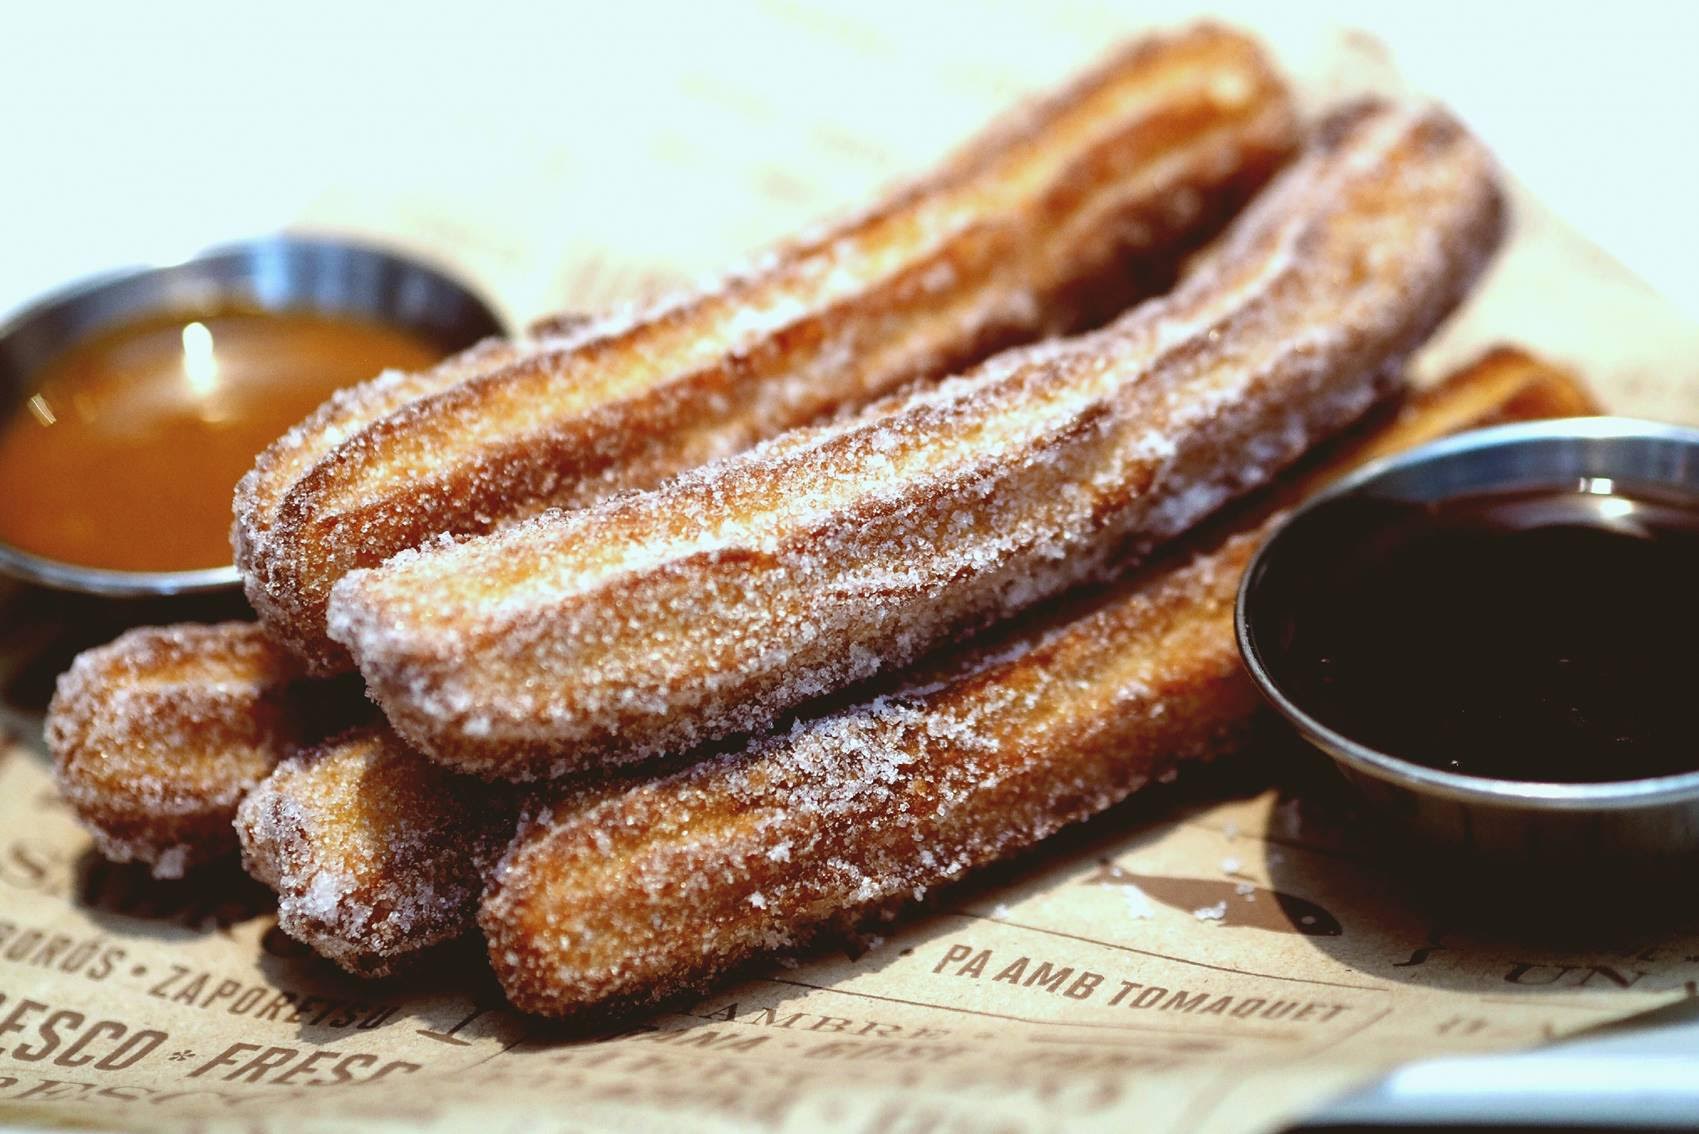 Churros with chocolate sauce are amazing at this Spanish restaurant in Coral Gables. The restaurant is called Bulla and everything on the menu is delicious!